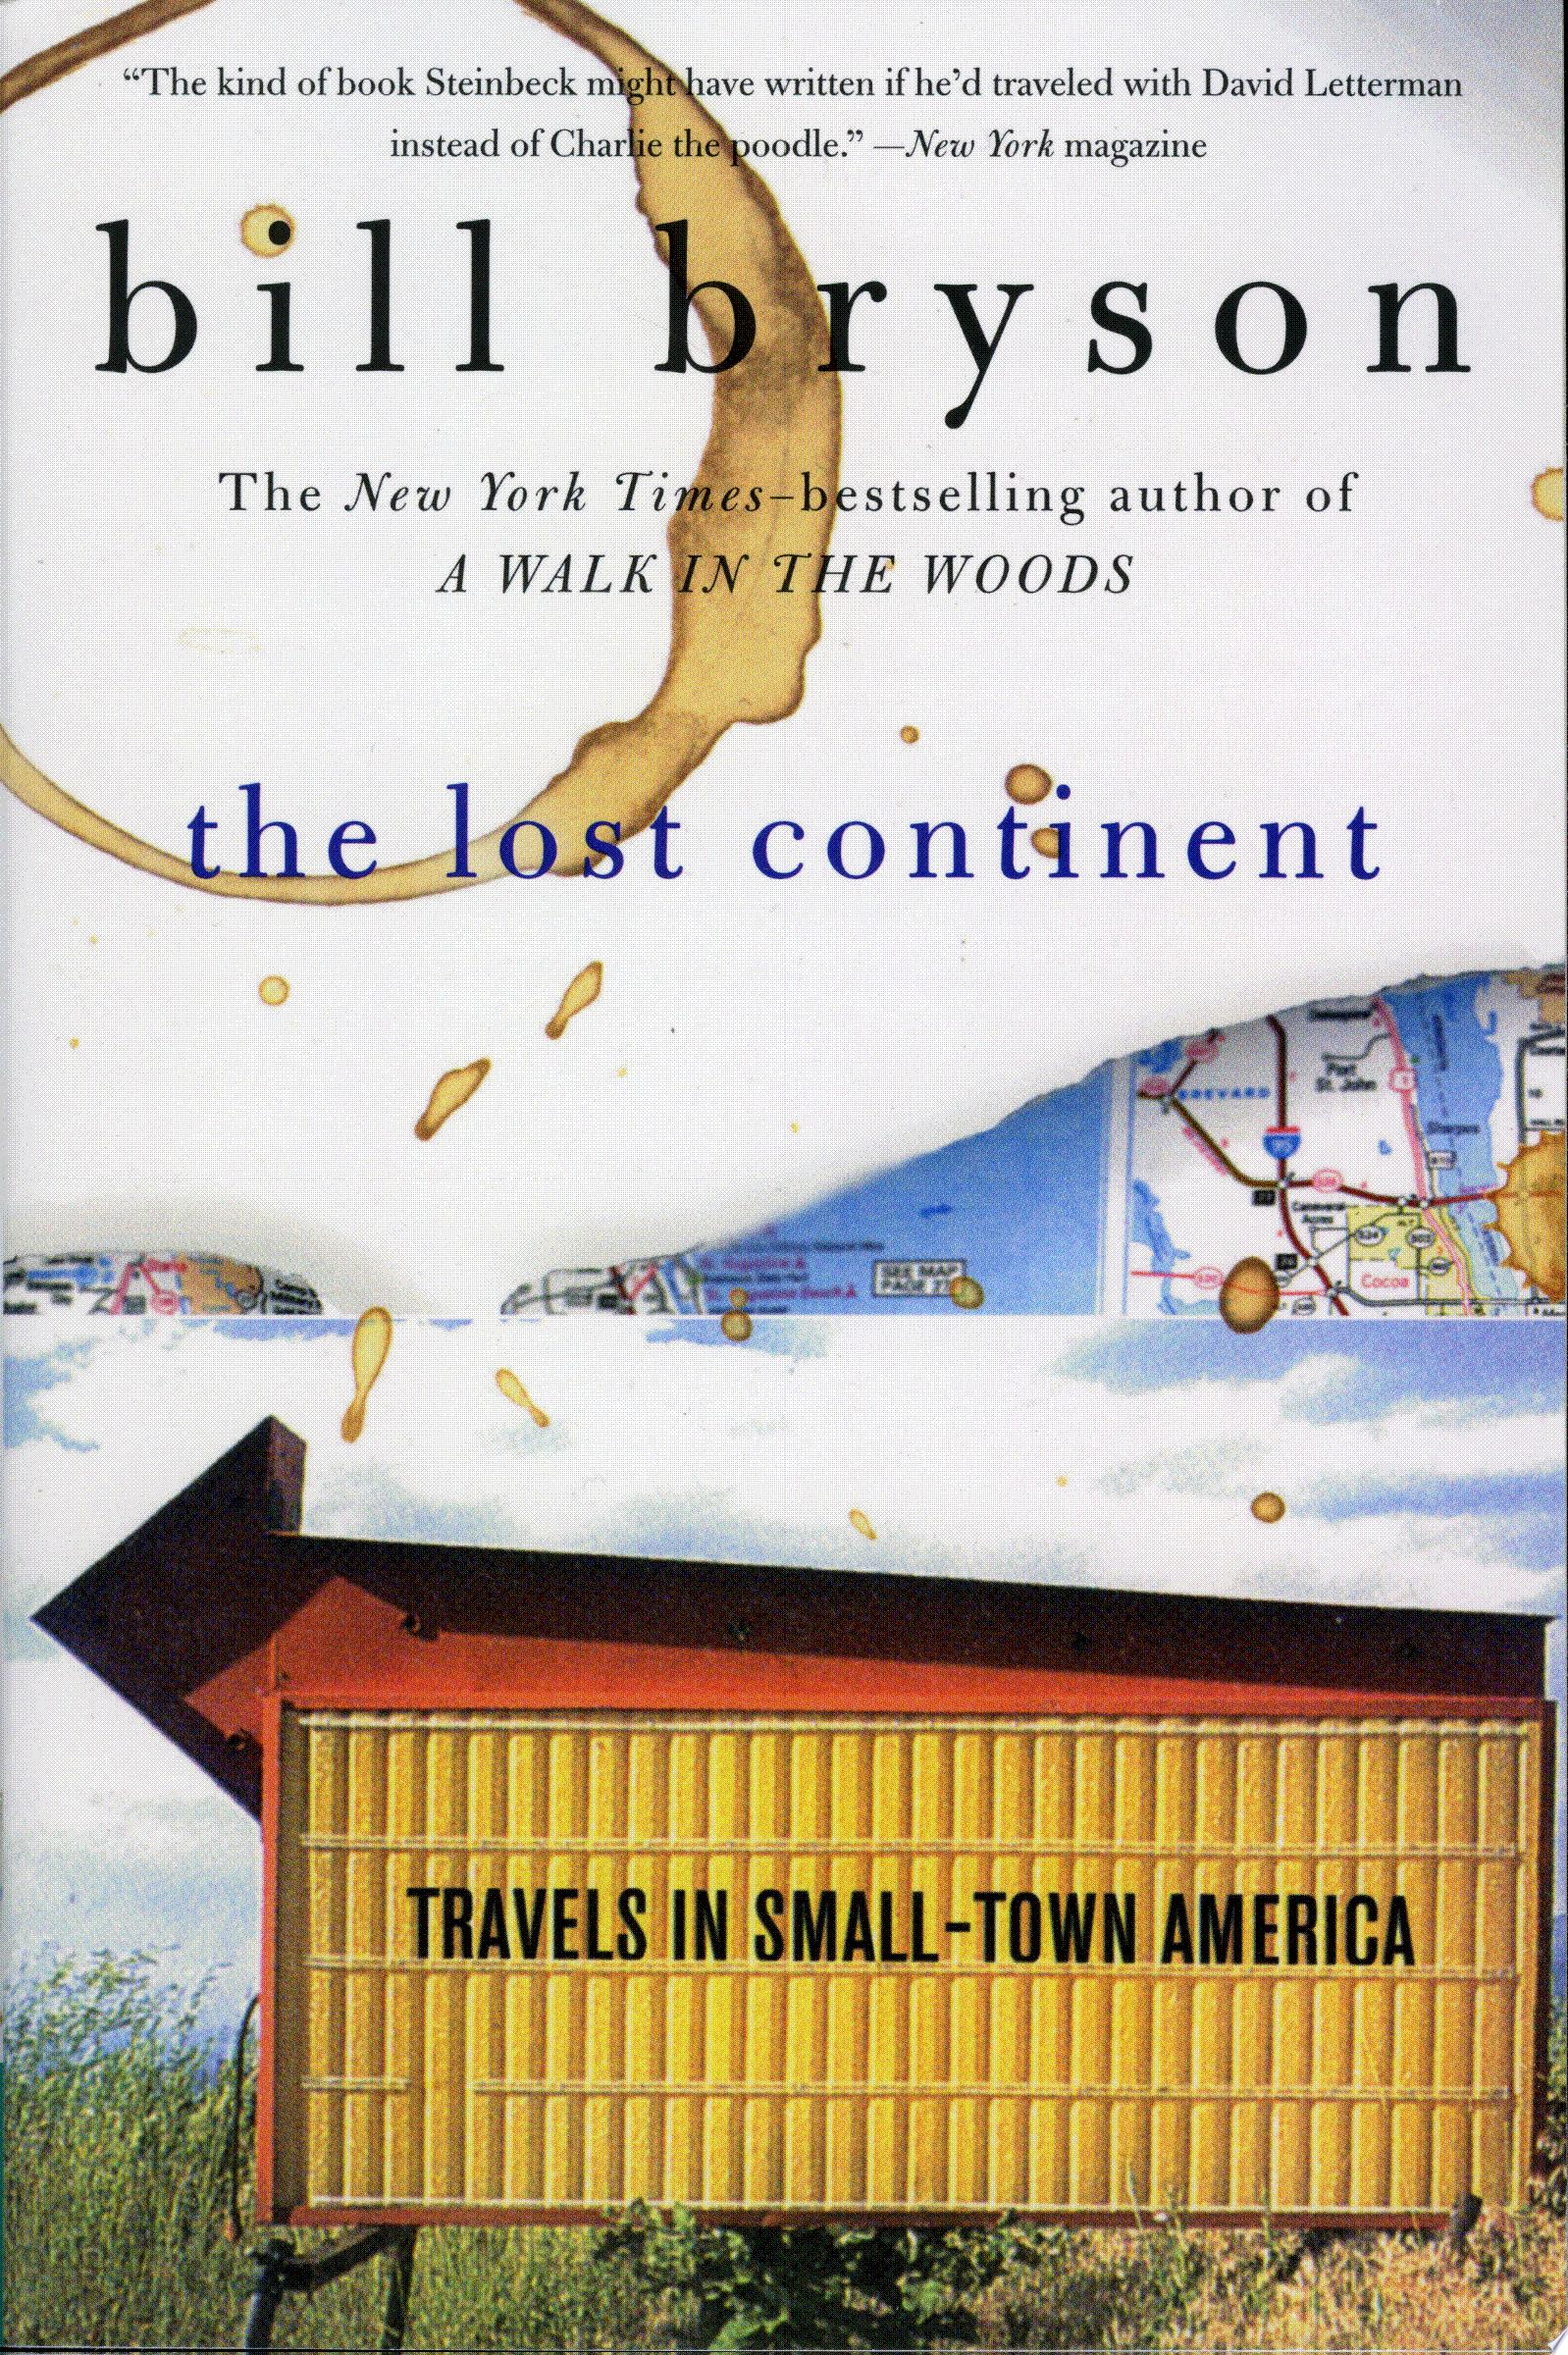 Image for "The Lost Continent"